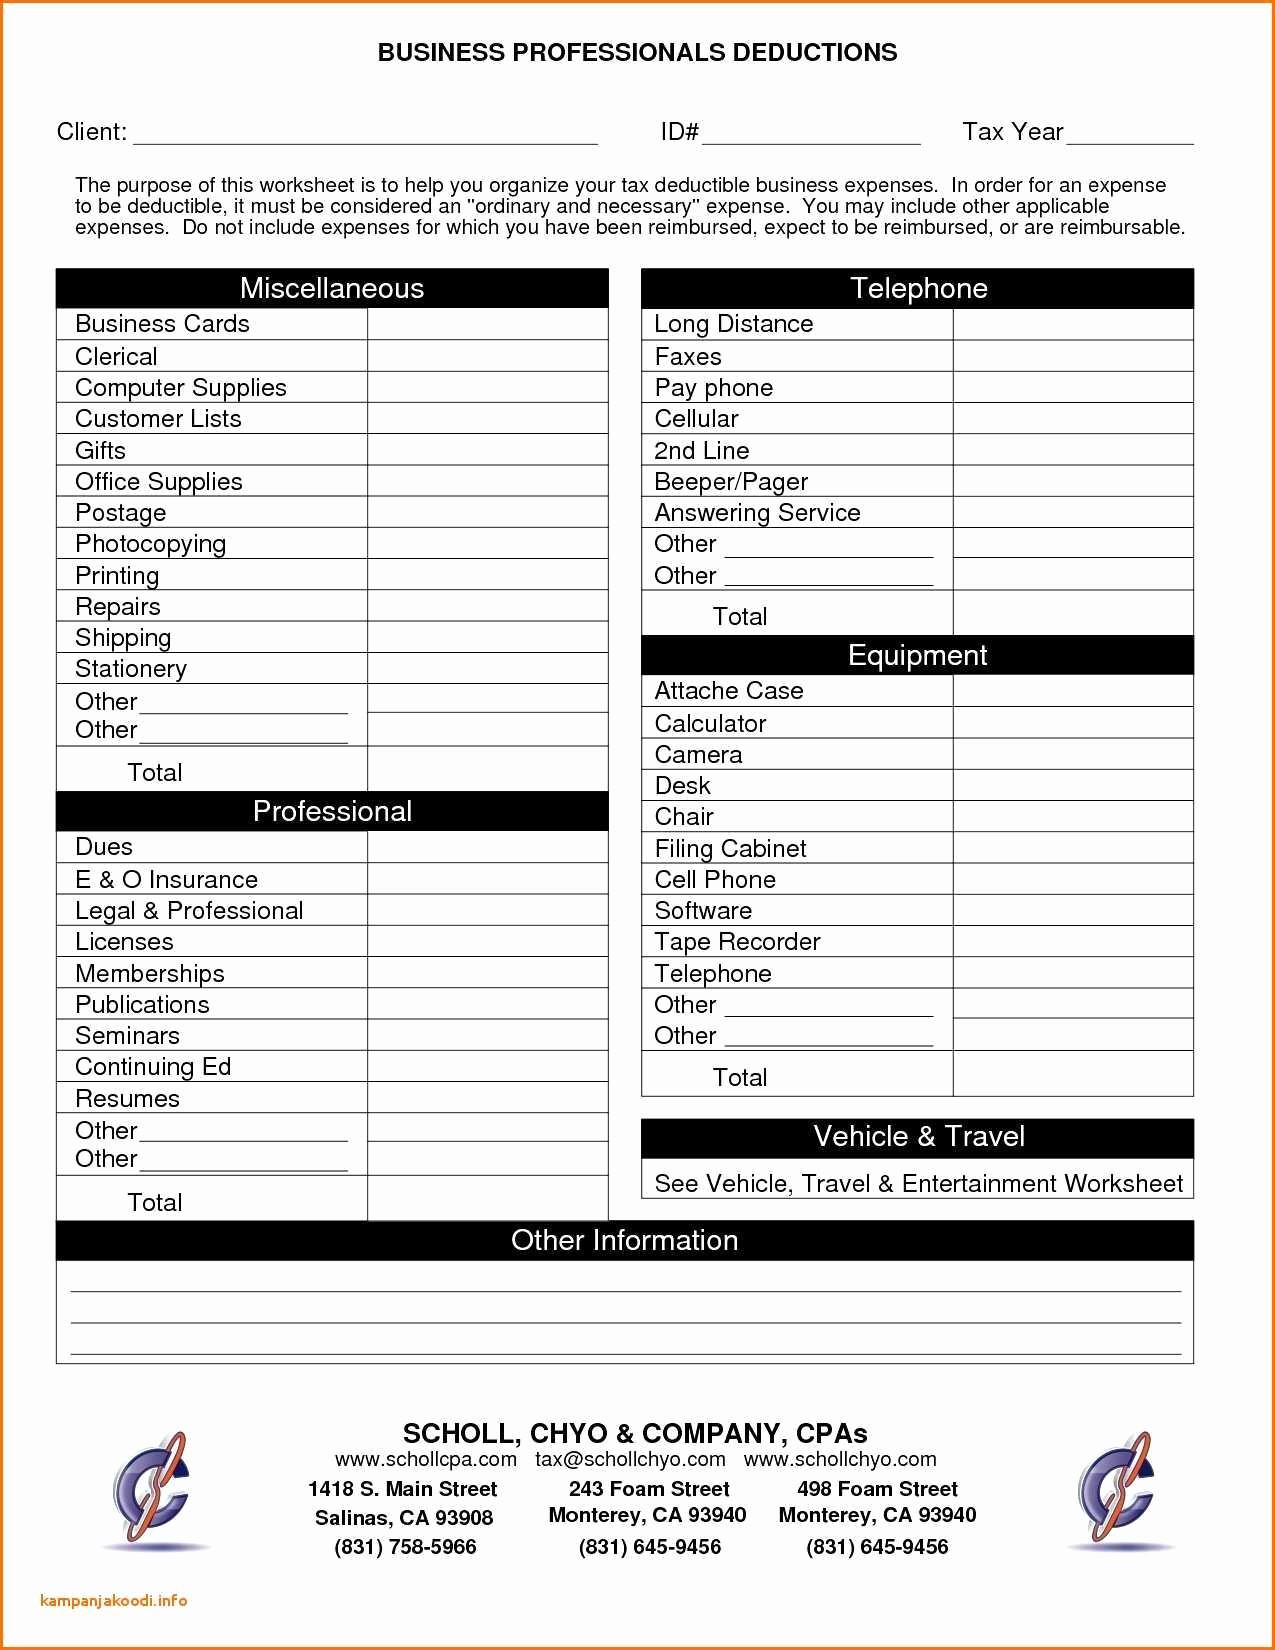 Small Business Deductions Worksheet petermcfarland.us